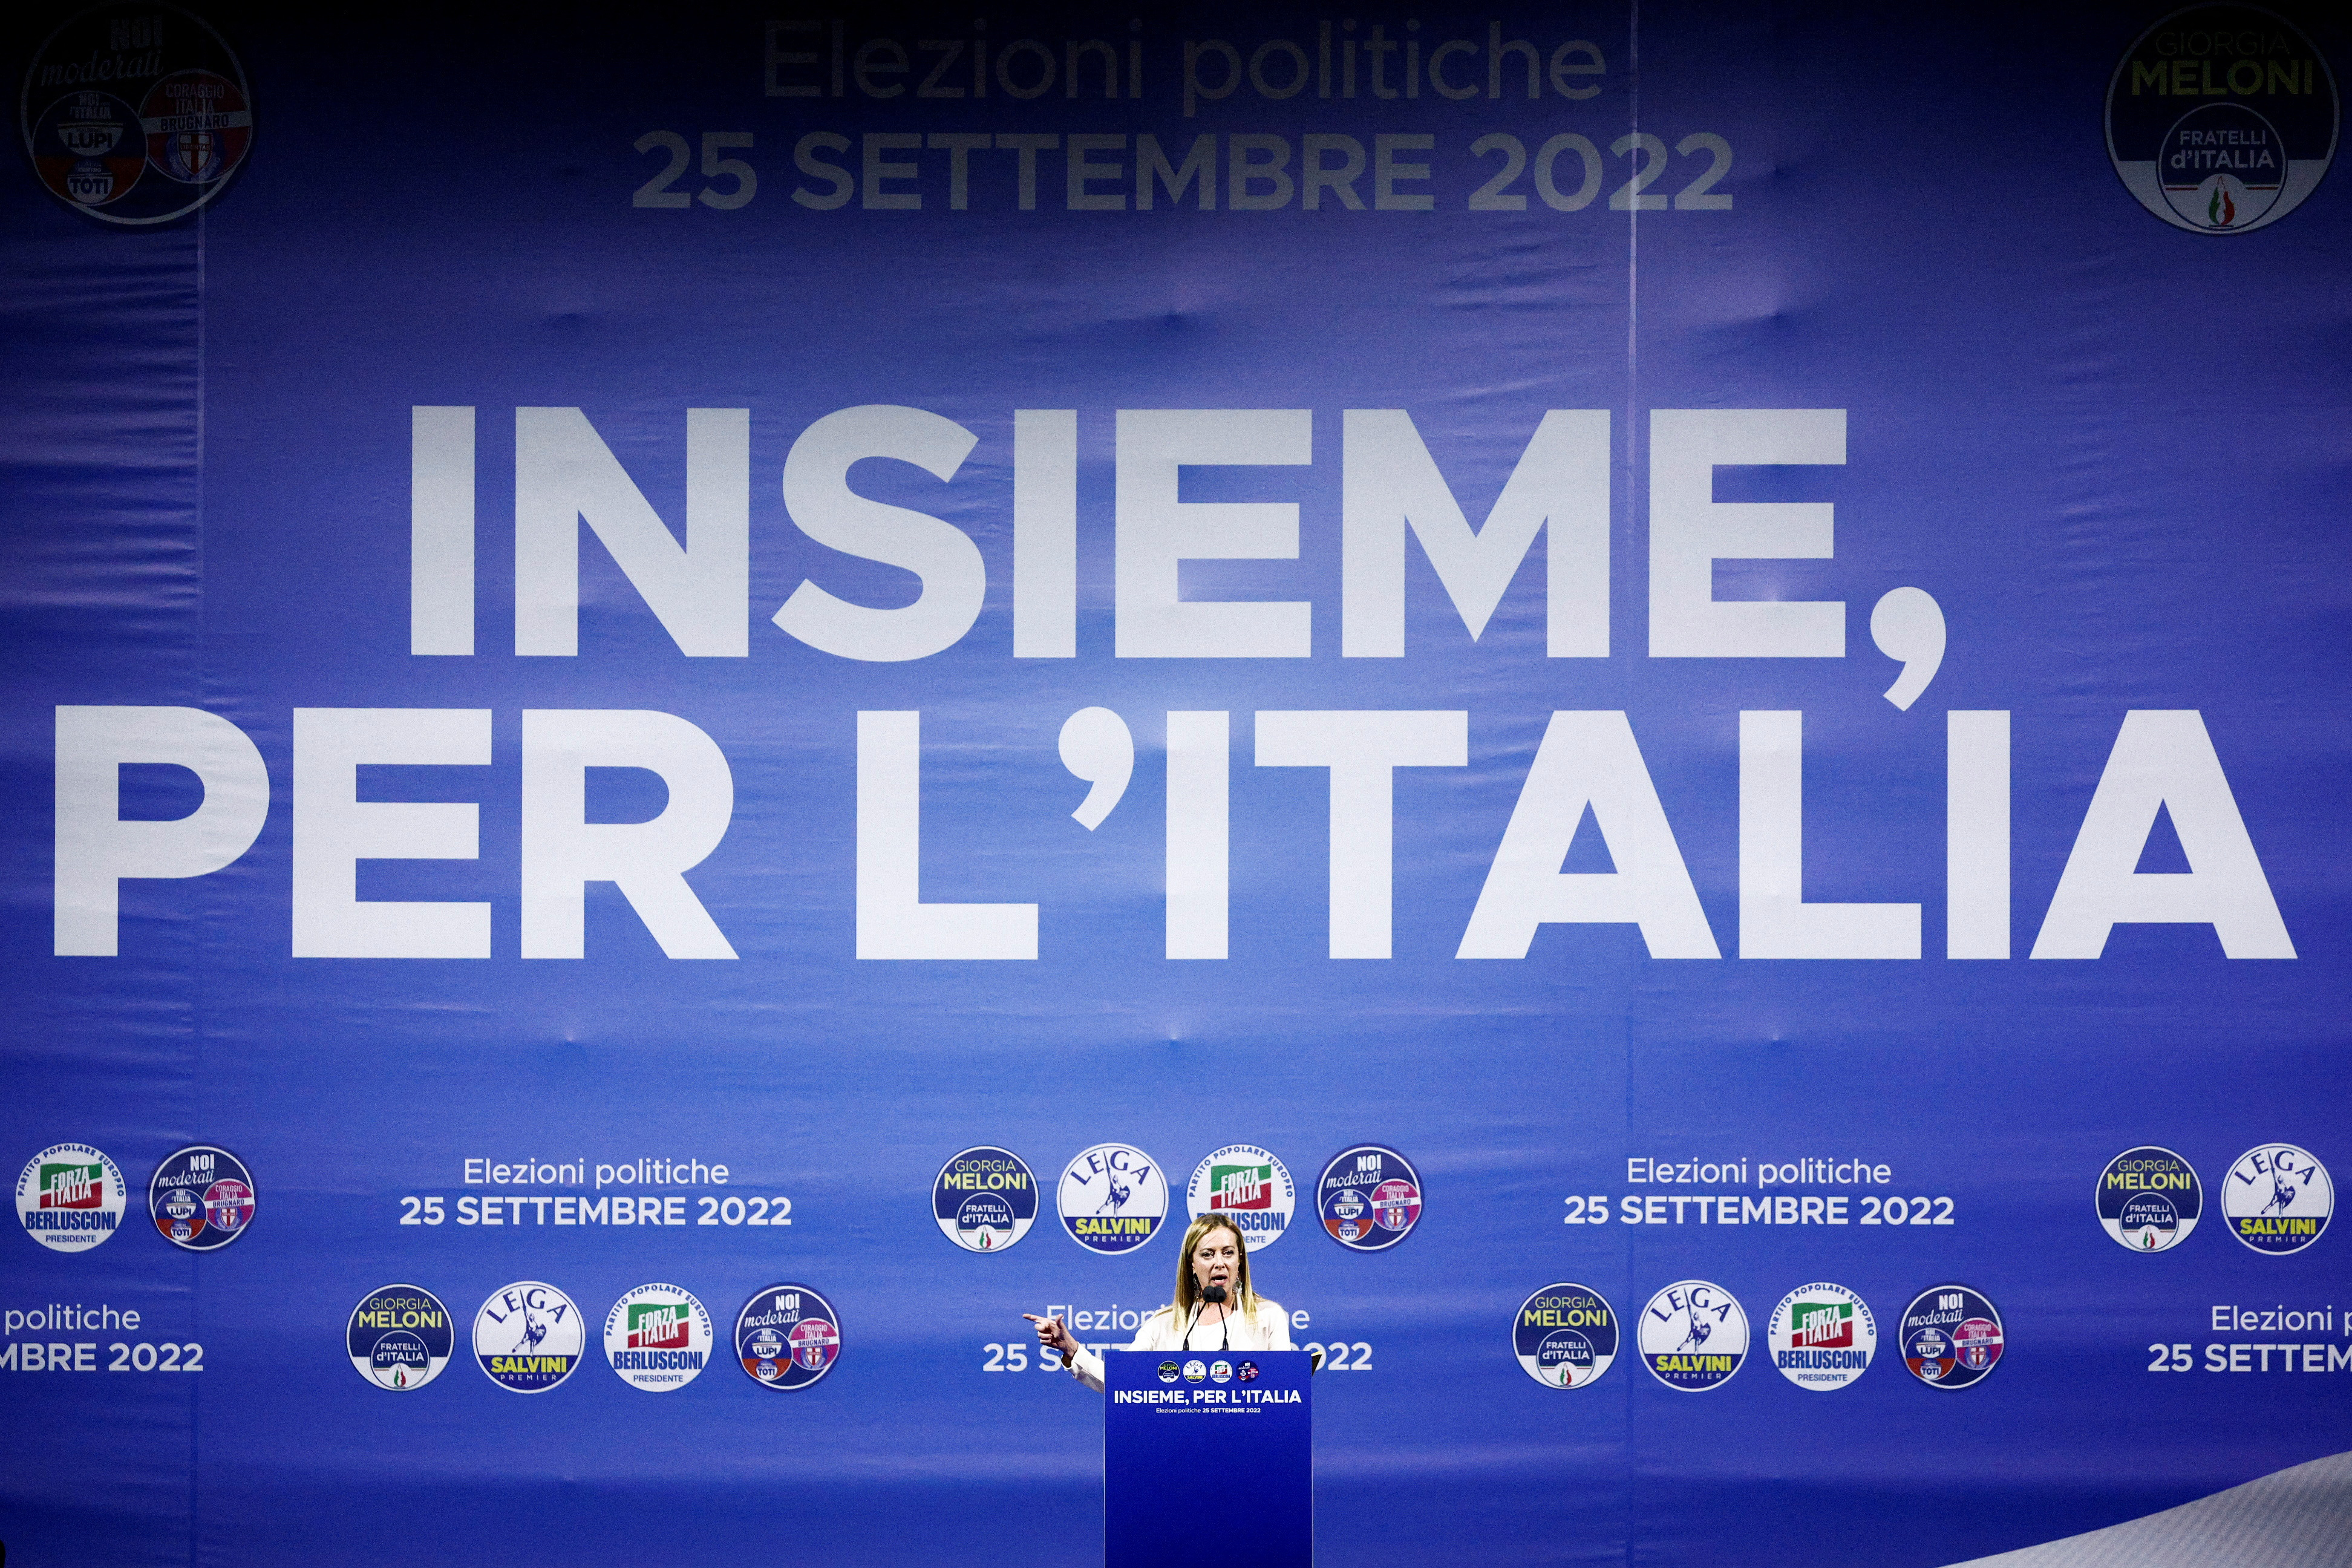 Italy's centre-right coalition closing campaign rally in Rome